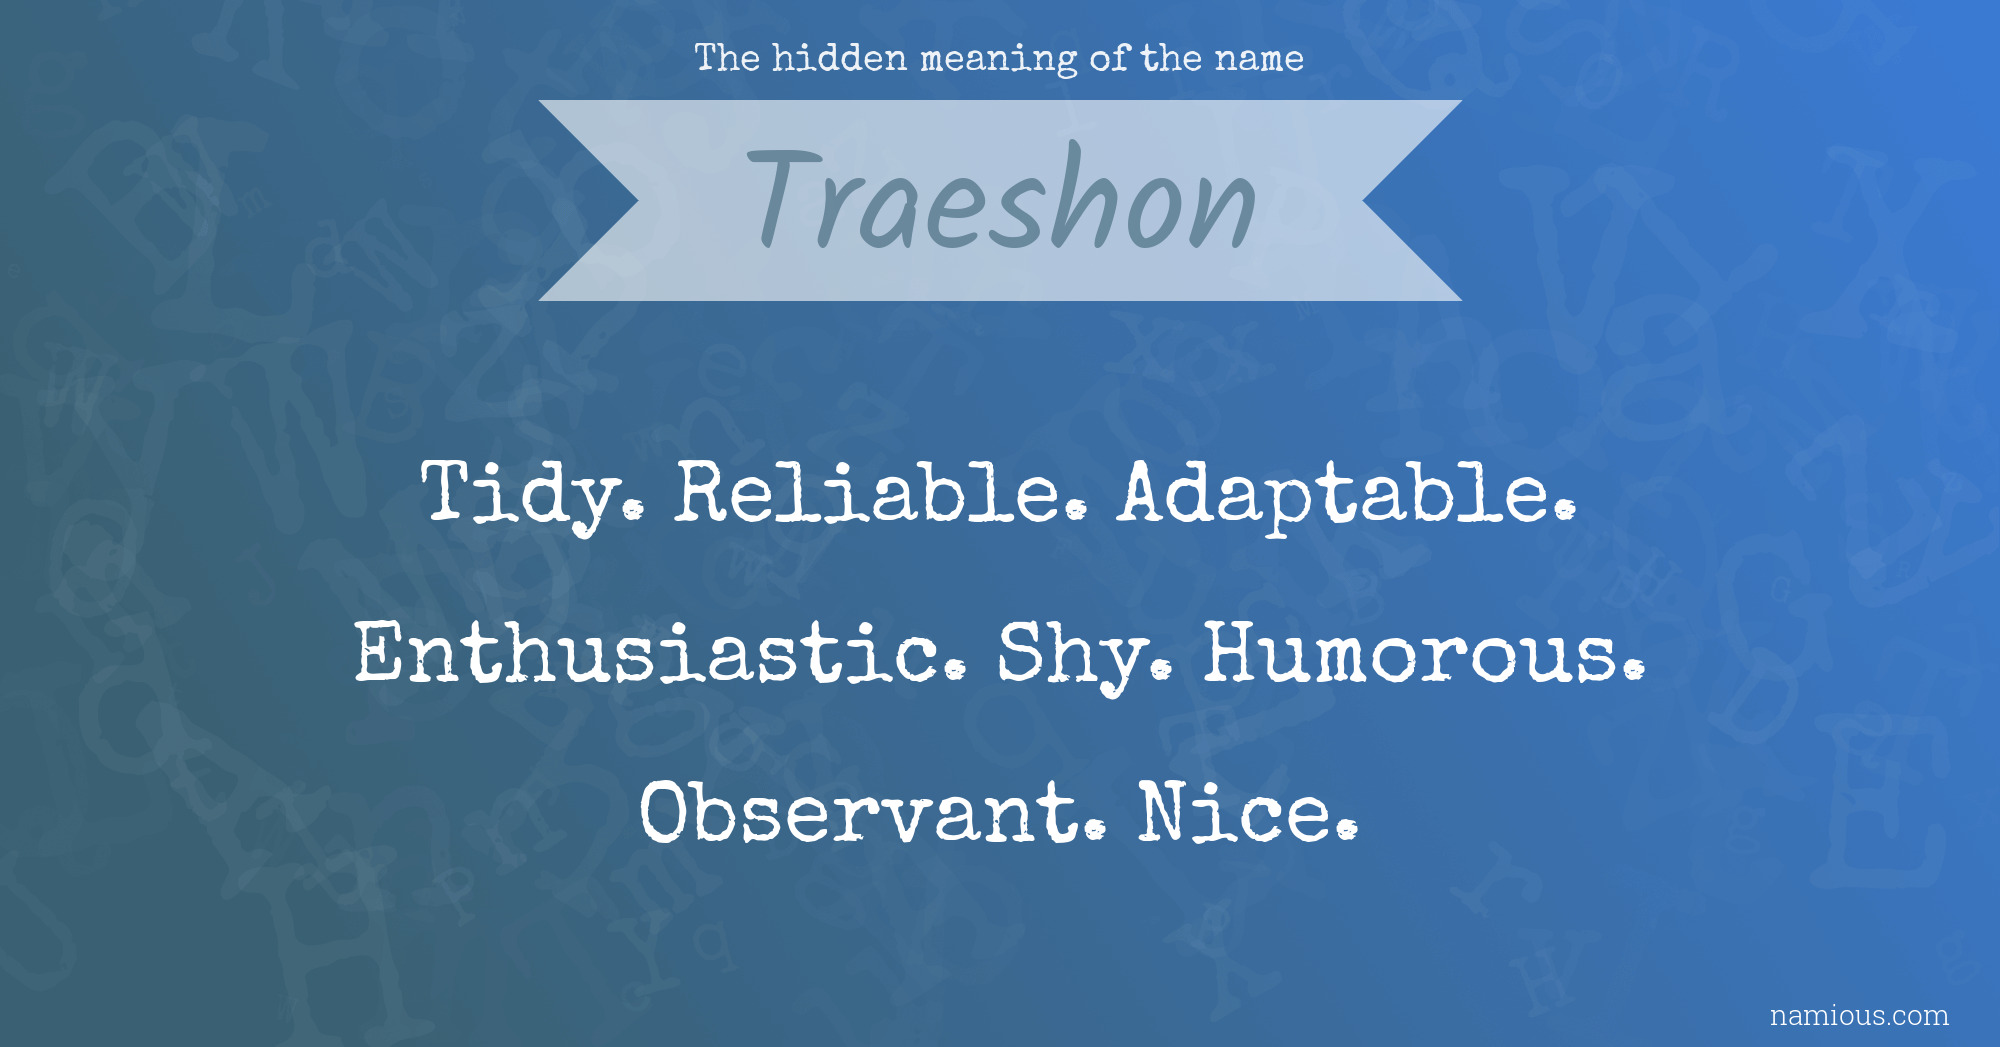 The hidden meaning of the name Traeshon